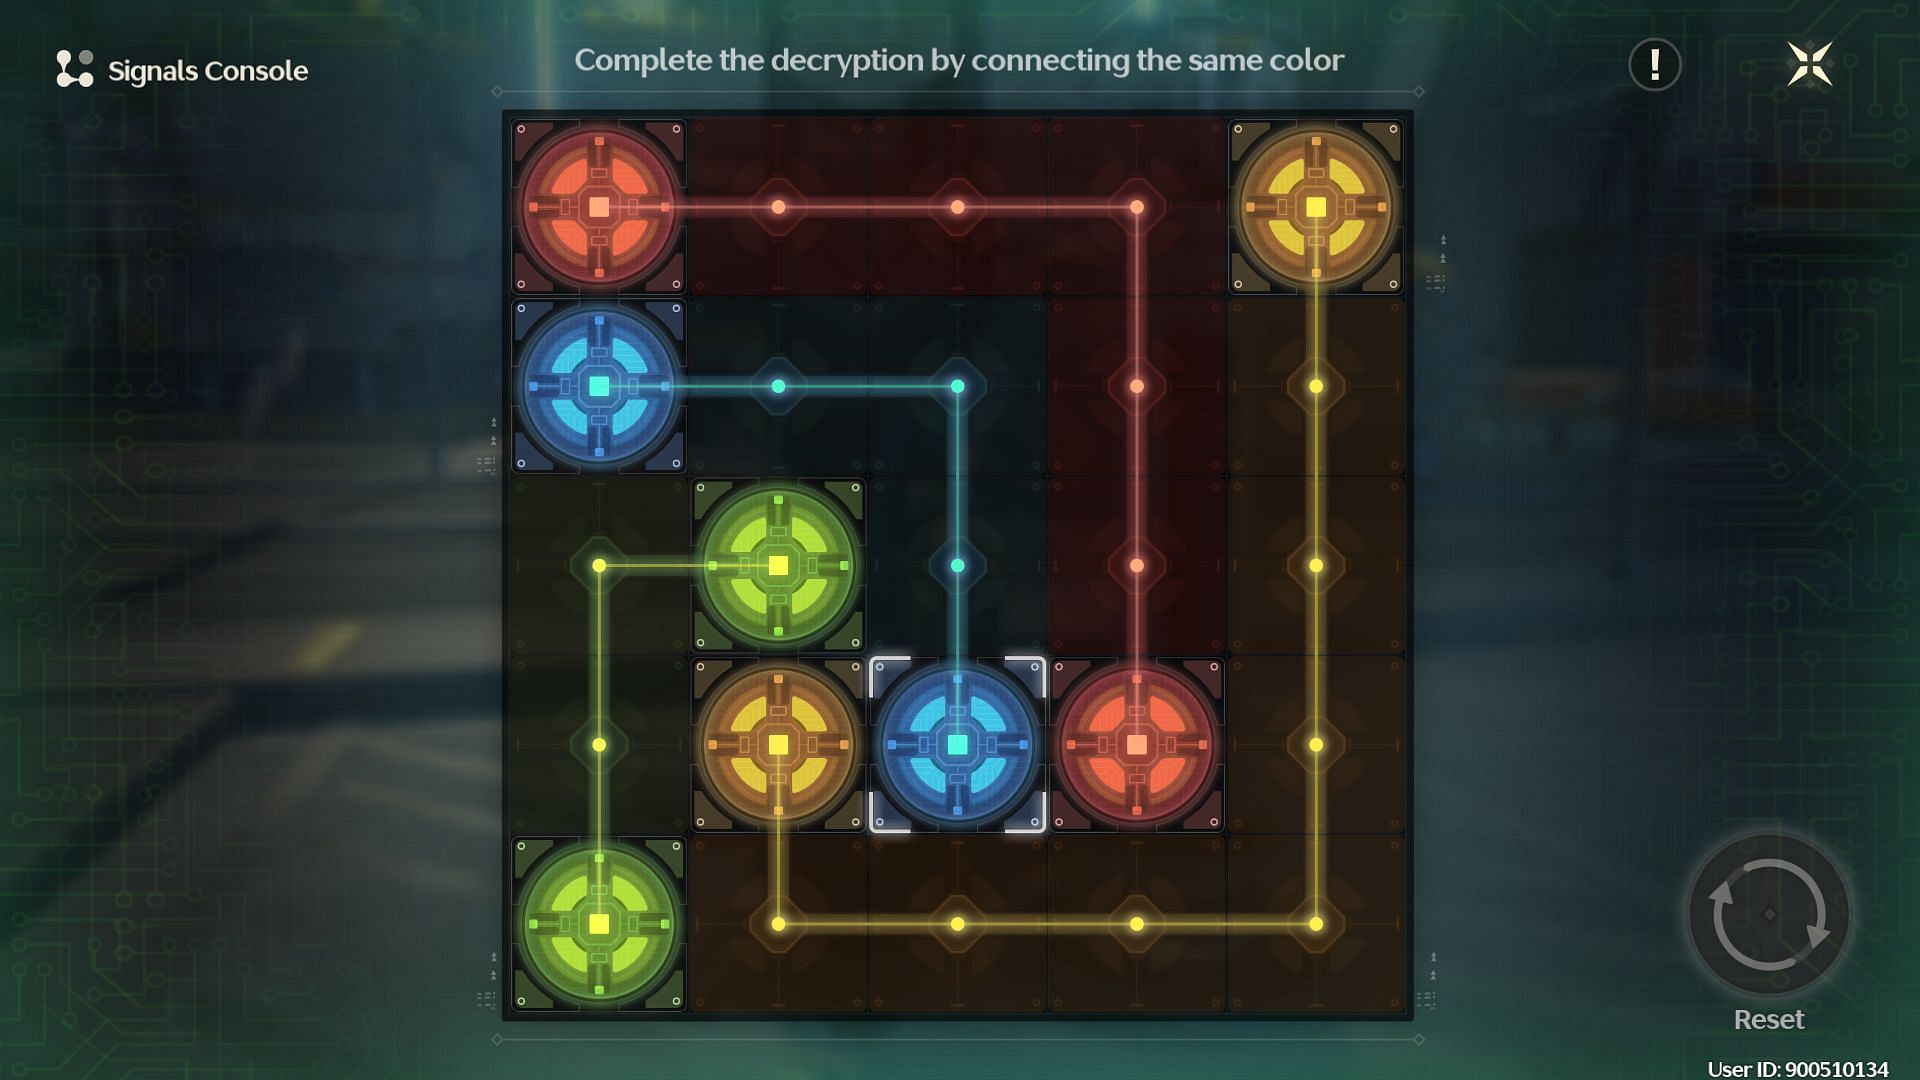 Signals Console puzzle solution for A Free Meal? I quest (Image via Kuro Games)